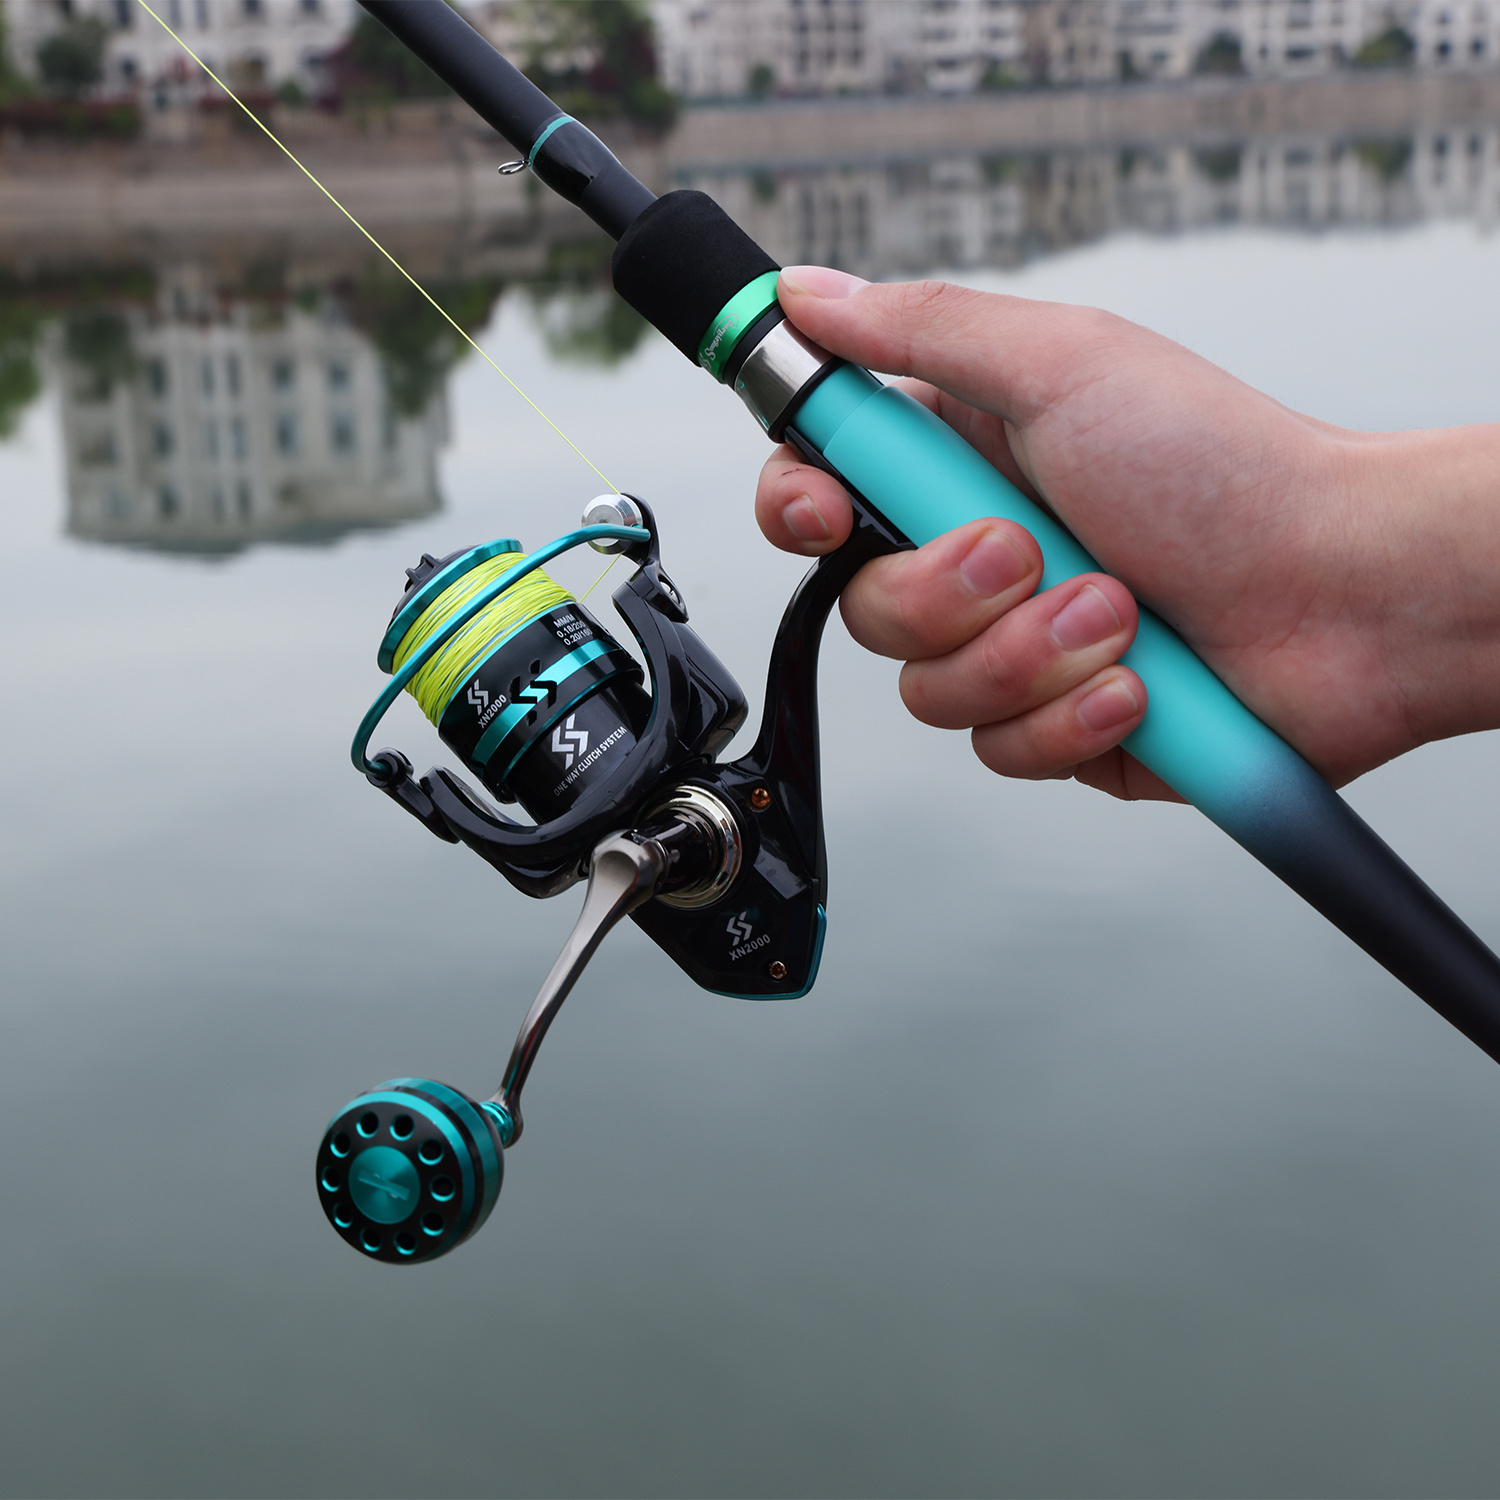 Catch.U Carbon Fiber Spinning/Casting Unbreakable Fishing Rod WT 4 35G  Line, 2 20LB Line 3Top Fast Lure For Bass And Bait Fishing 230627 From  Lian09, $12.58